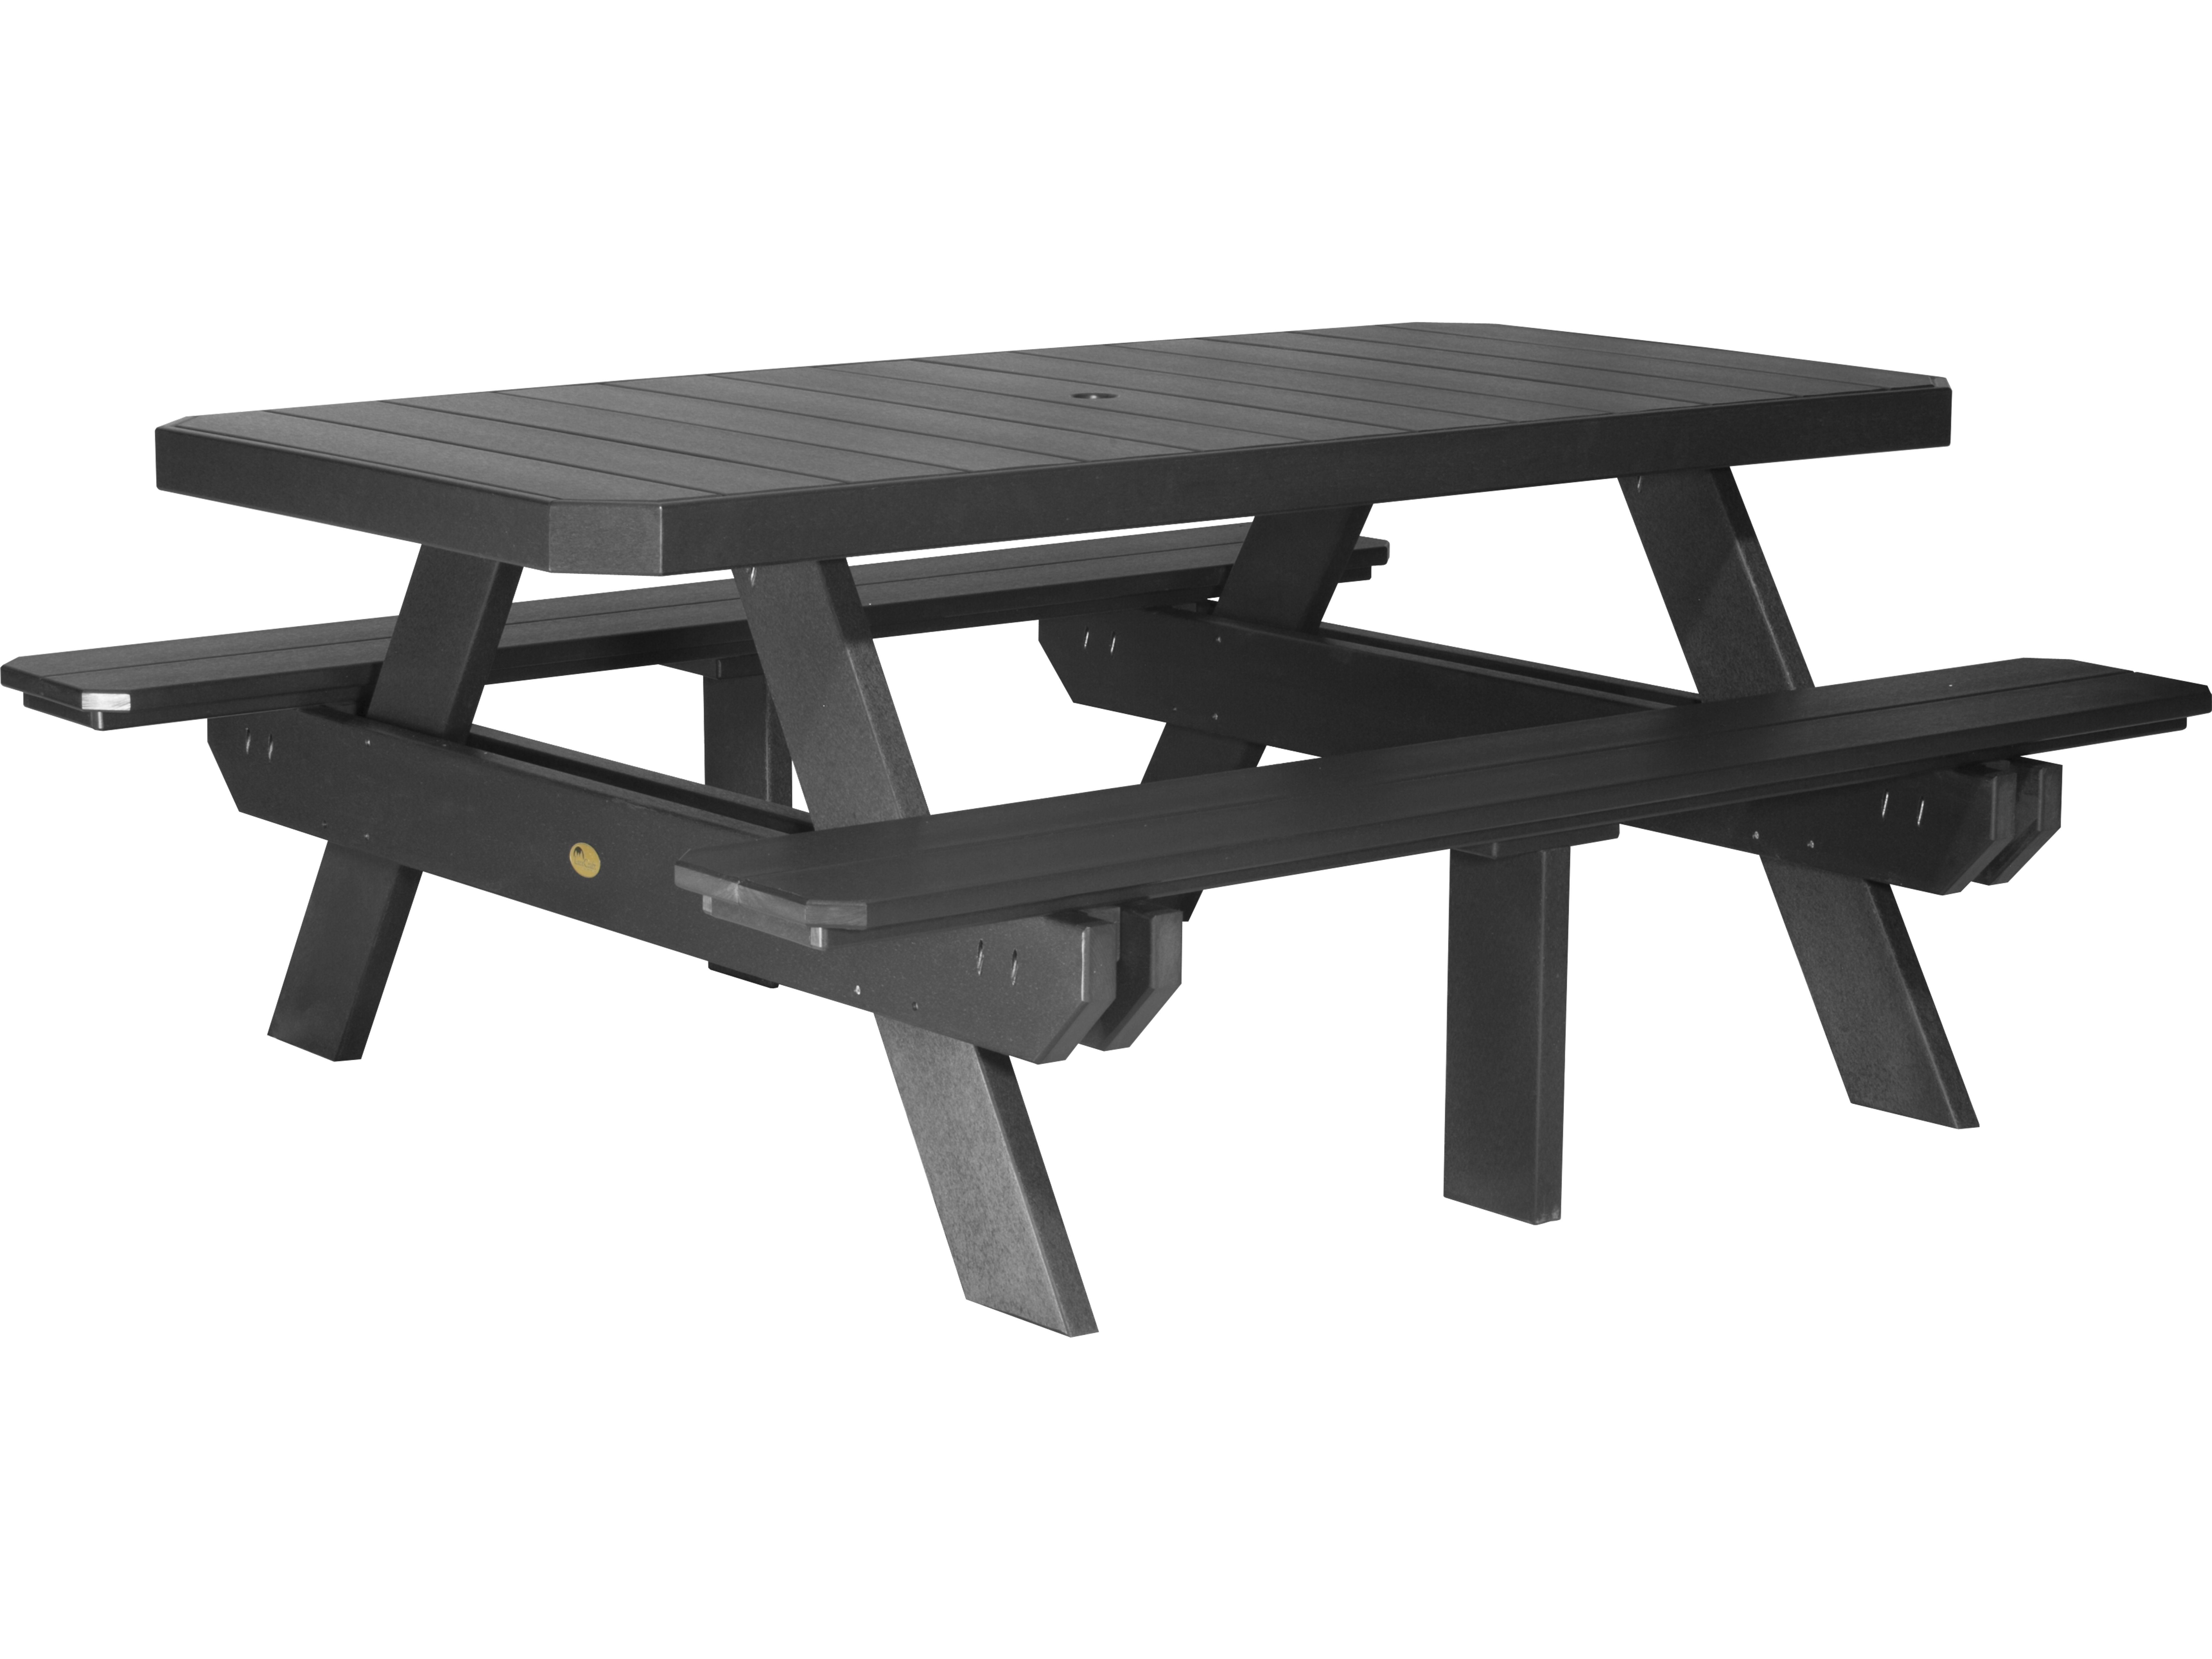 LuxCraft Recycled Plastic 73.5 x 64 Rectangular Picnic Table with